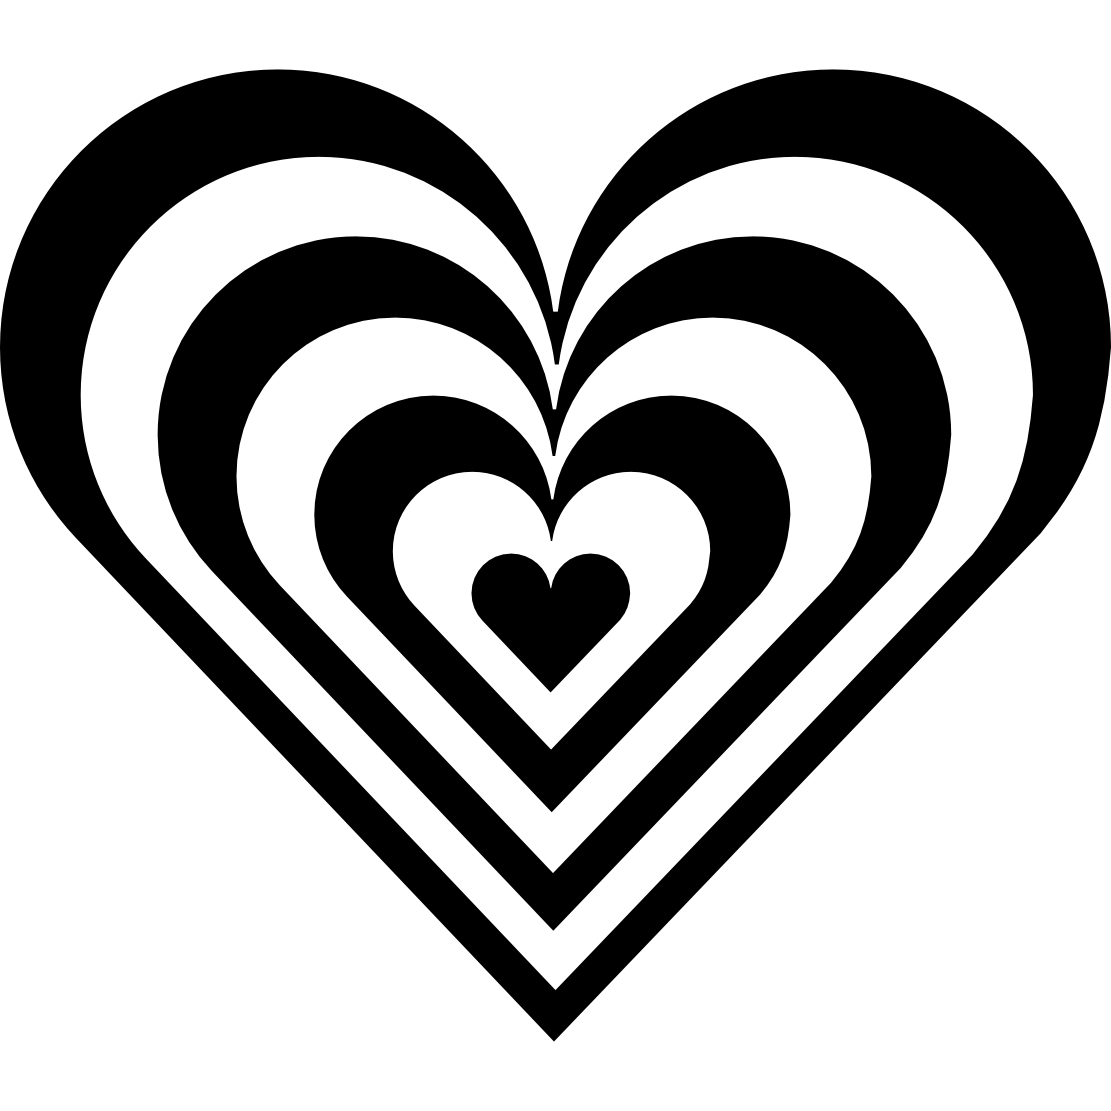 Heart Clip Art Black And White | Clipart Panda - Free Clipart Images